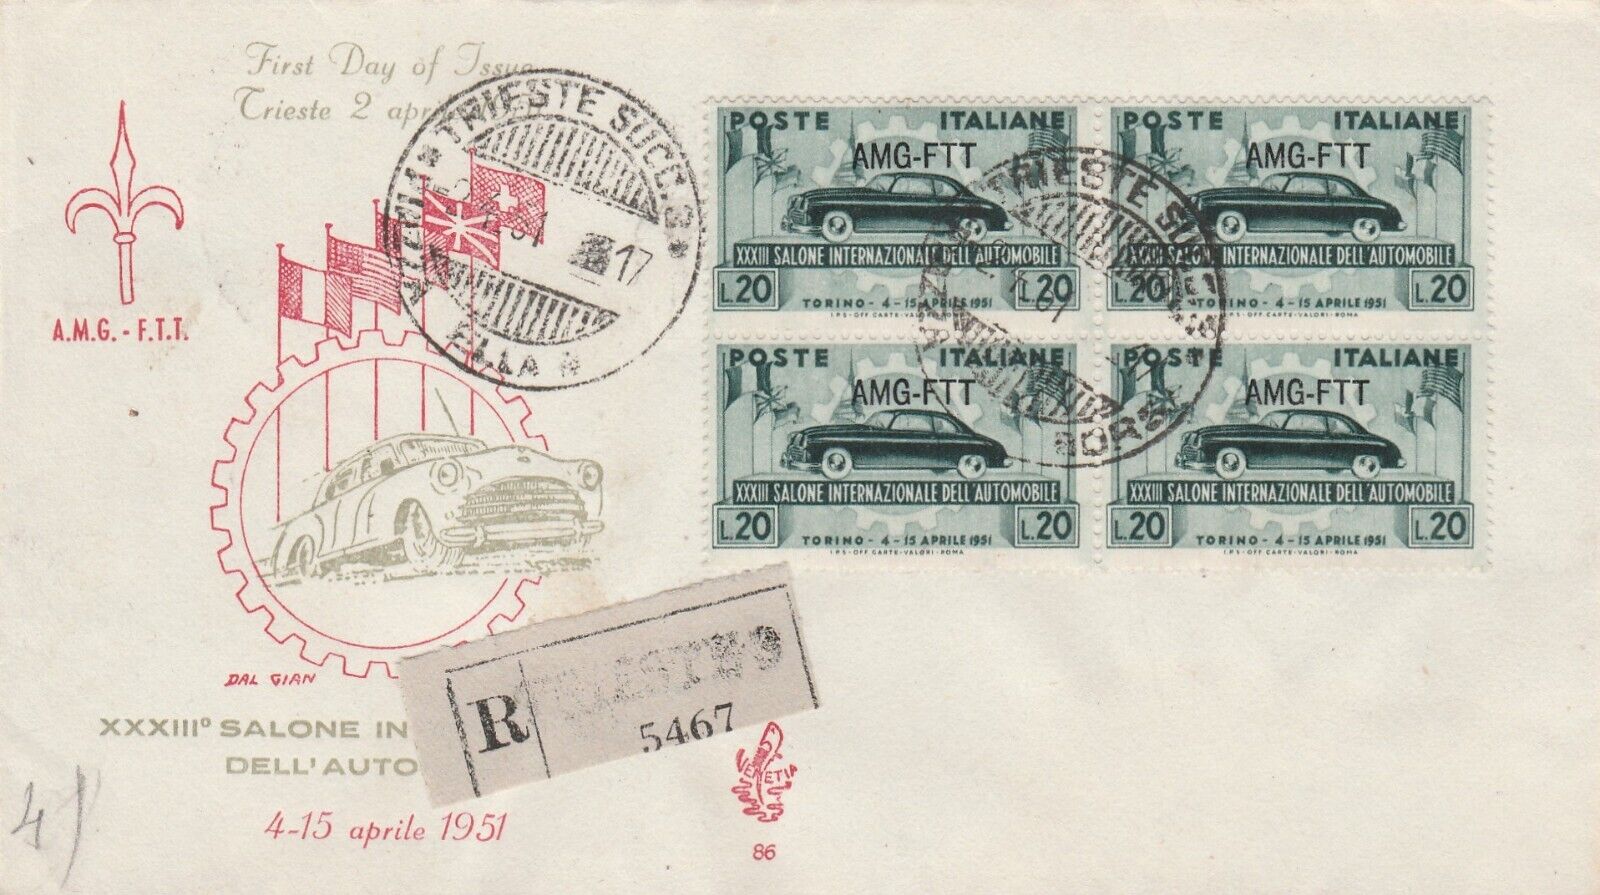 Trieste AMGFTT Italy 1951 FDC Mailed Registered to USA